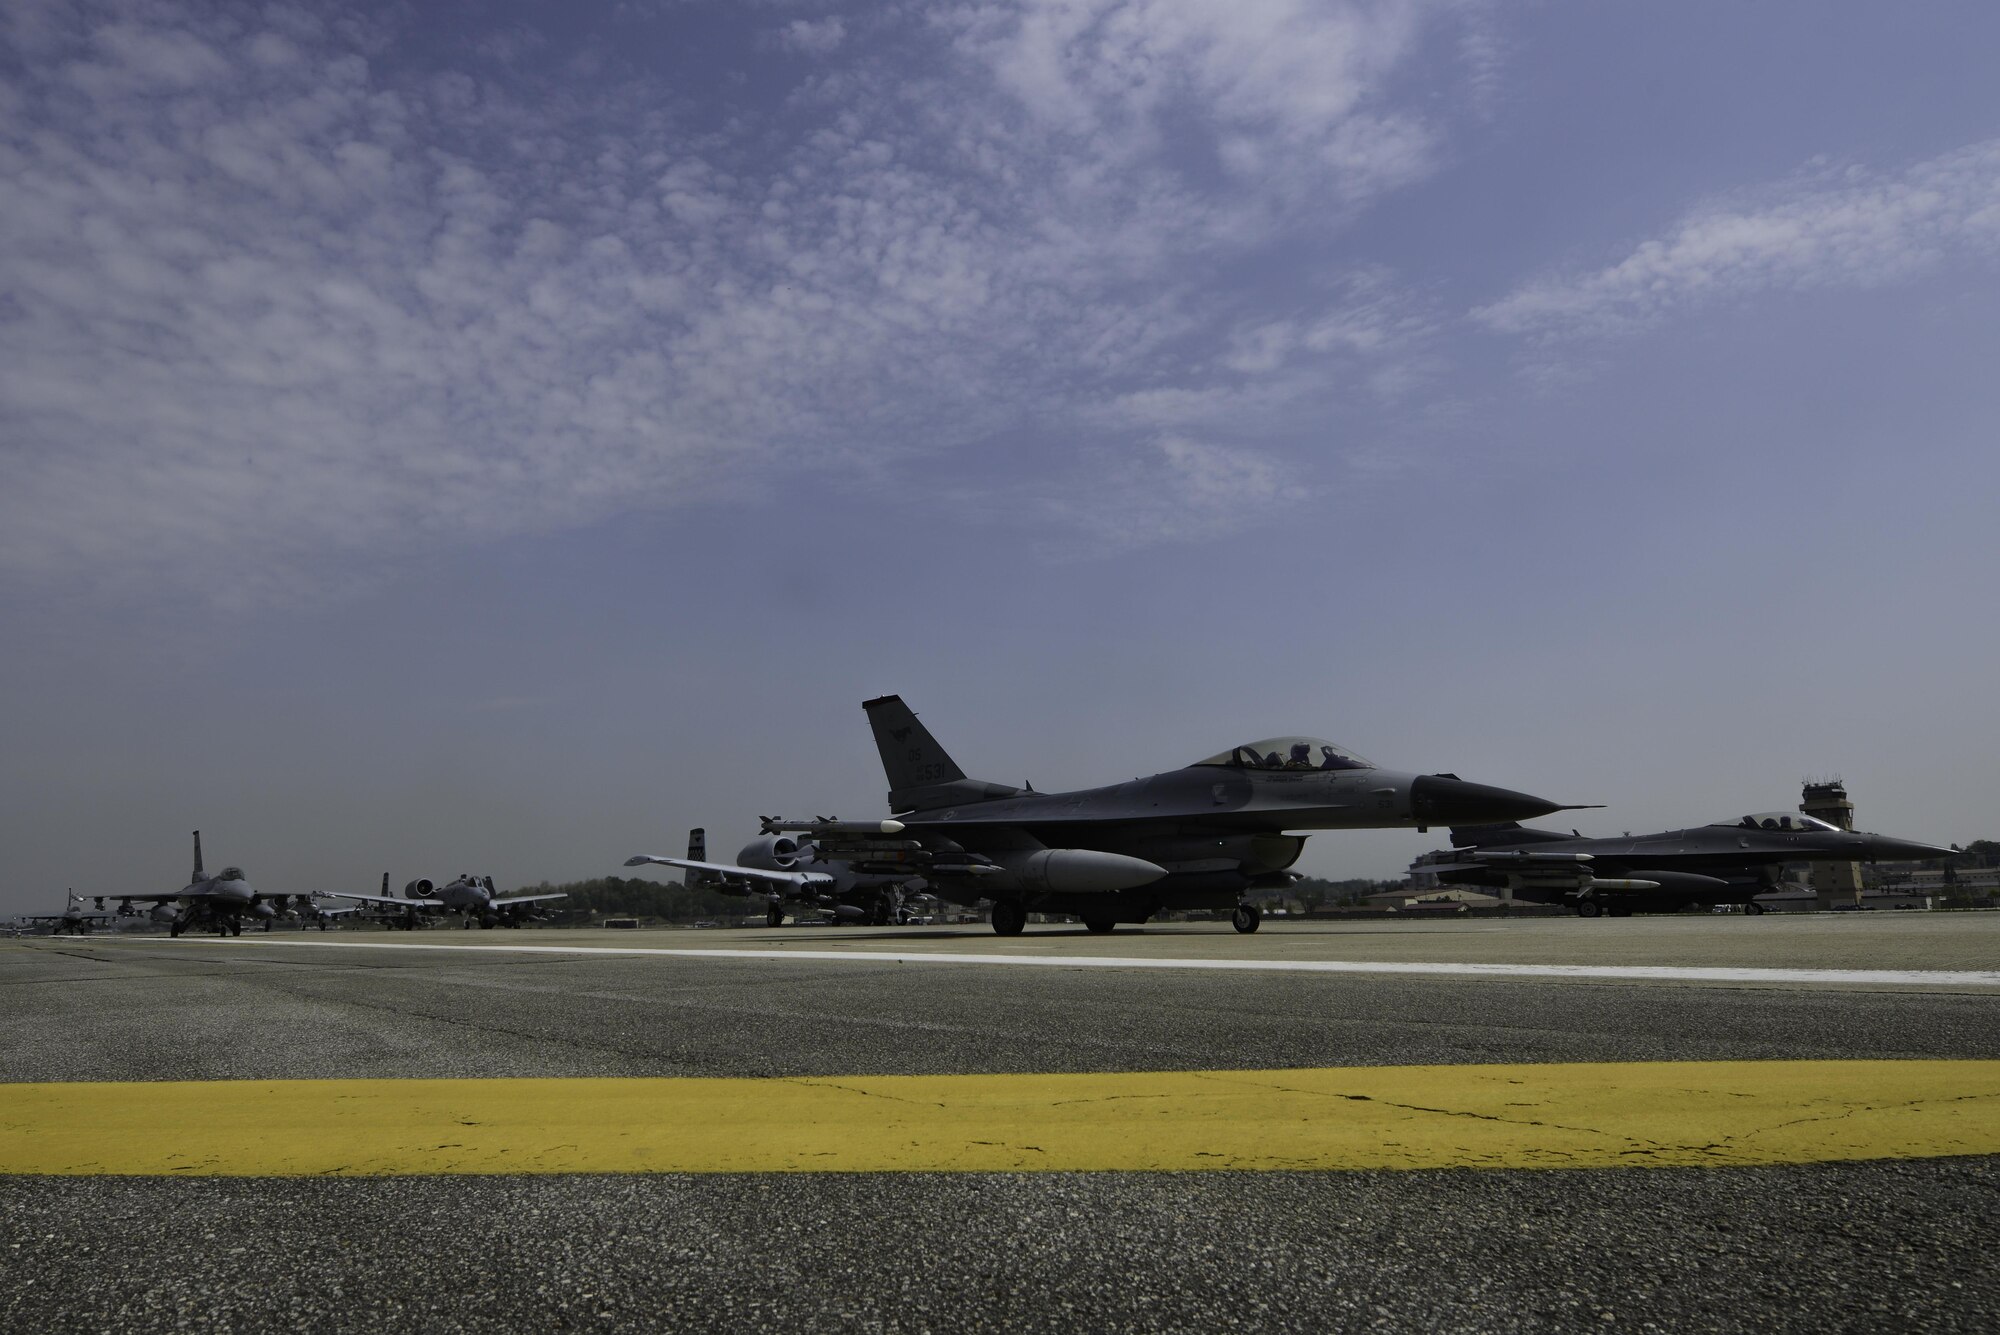 A-10 Thunderbolt II and F-16 Fighting Falcon fighter aircraft perform an 'Elephant Walk' on the runway this week during Exercise Beverly Herd 16-01 at Osan Air Base, Republic of Korea. The Elephant Walk was a demonstration of U.S. Air Force capabilities and strength and showcases the wing's ability to generate combat airpower in an expedient manner in order to respond to simulated contingency operations. The A-10 Thunderbolt II aircraft are the 25th Fighter Squadron "Draggins" and the F-16 Fighting Falcon aircraft are the 36th Fighter Squadron "Friends" from the 51st Fighter Wing, Osan AB, ROK; the additional F-16 aircraft are the 179th Fighter Squadron "Bulldogs" from the 148th Fighter Wing out of Duluth Air National Guard Base, Minnesota. (U.S. Air Force photo by Senior Airman Dillian Bamman/Released)